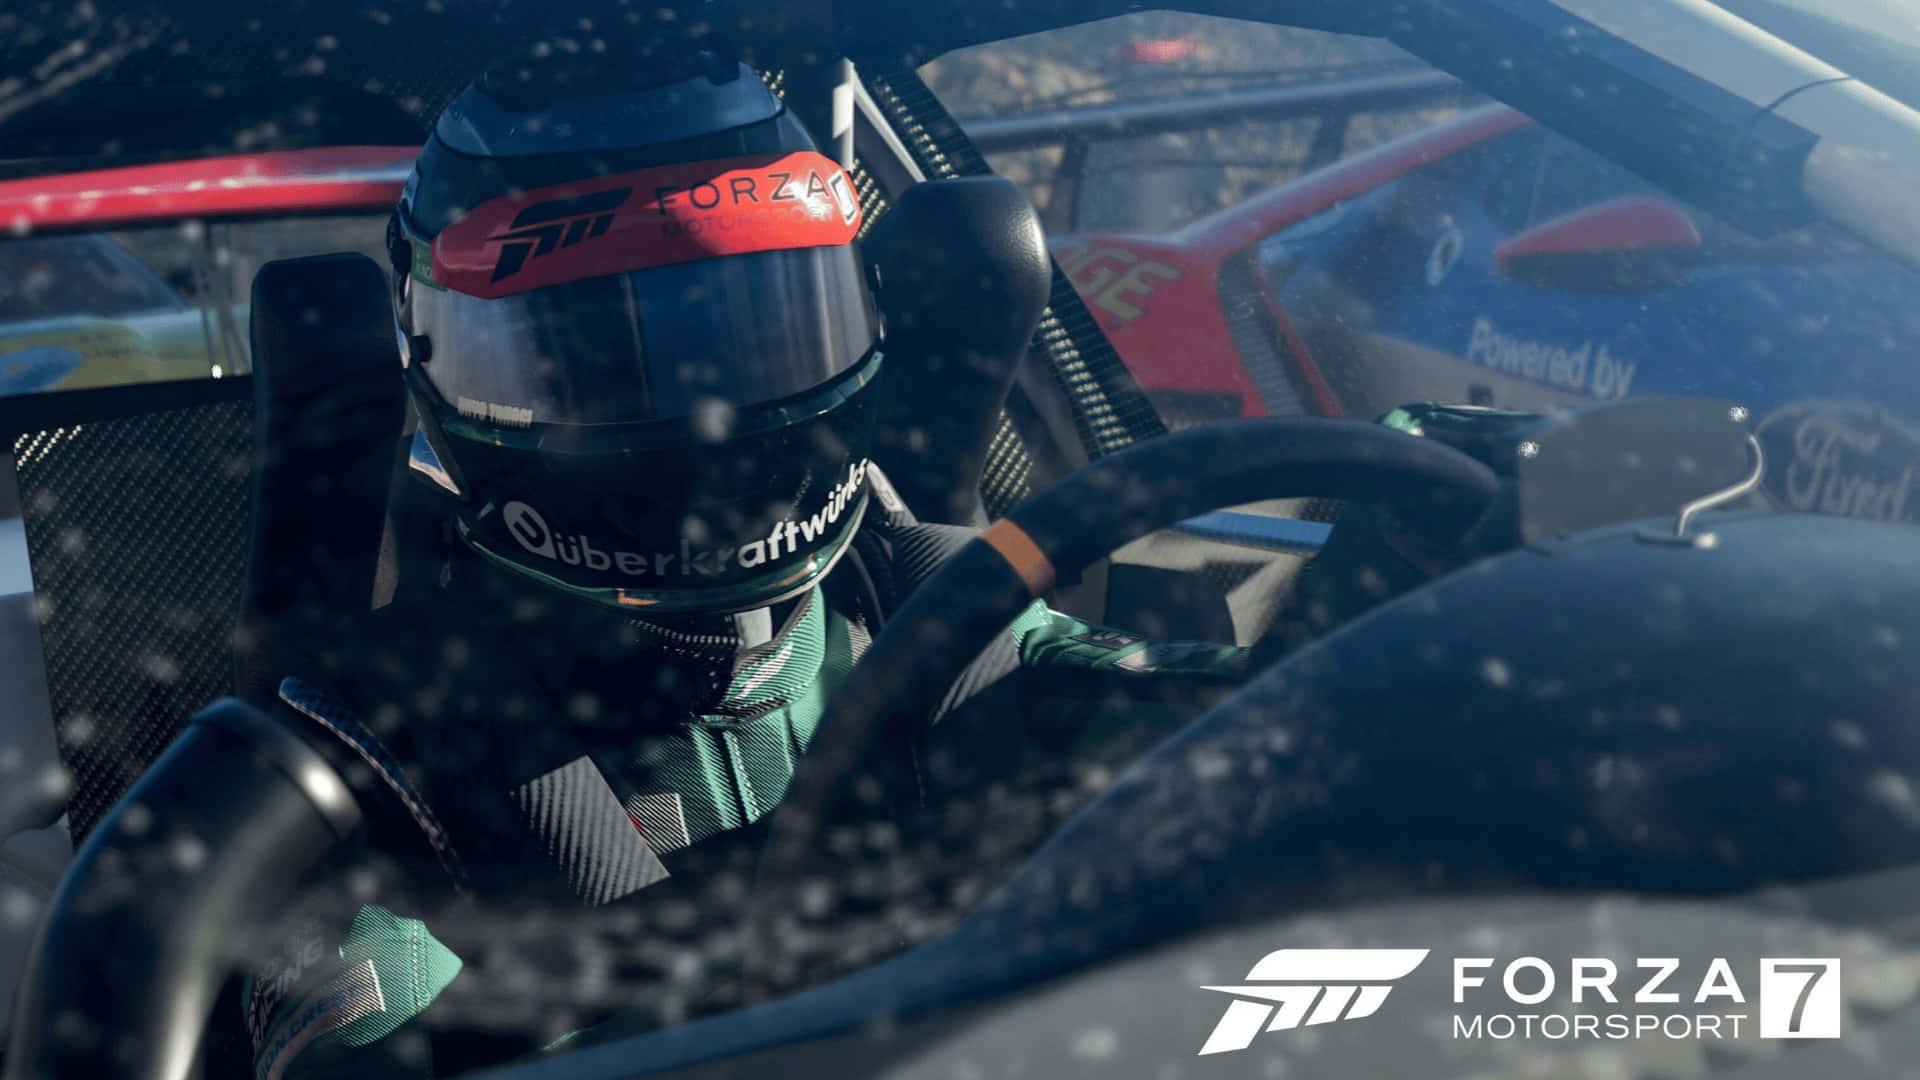 Drivers Ready for the Racing Action in Forza Motorsport 7